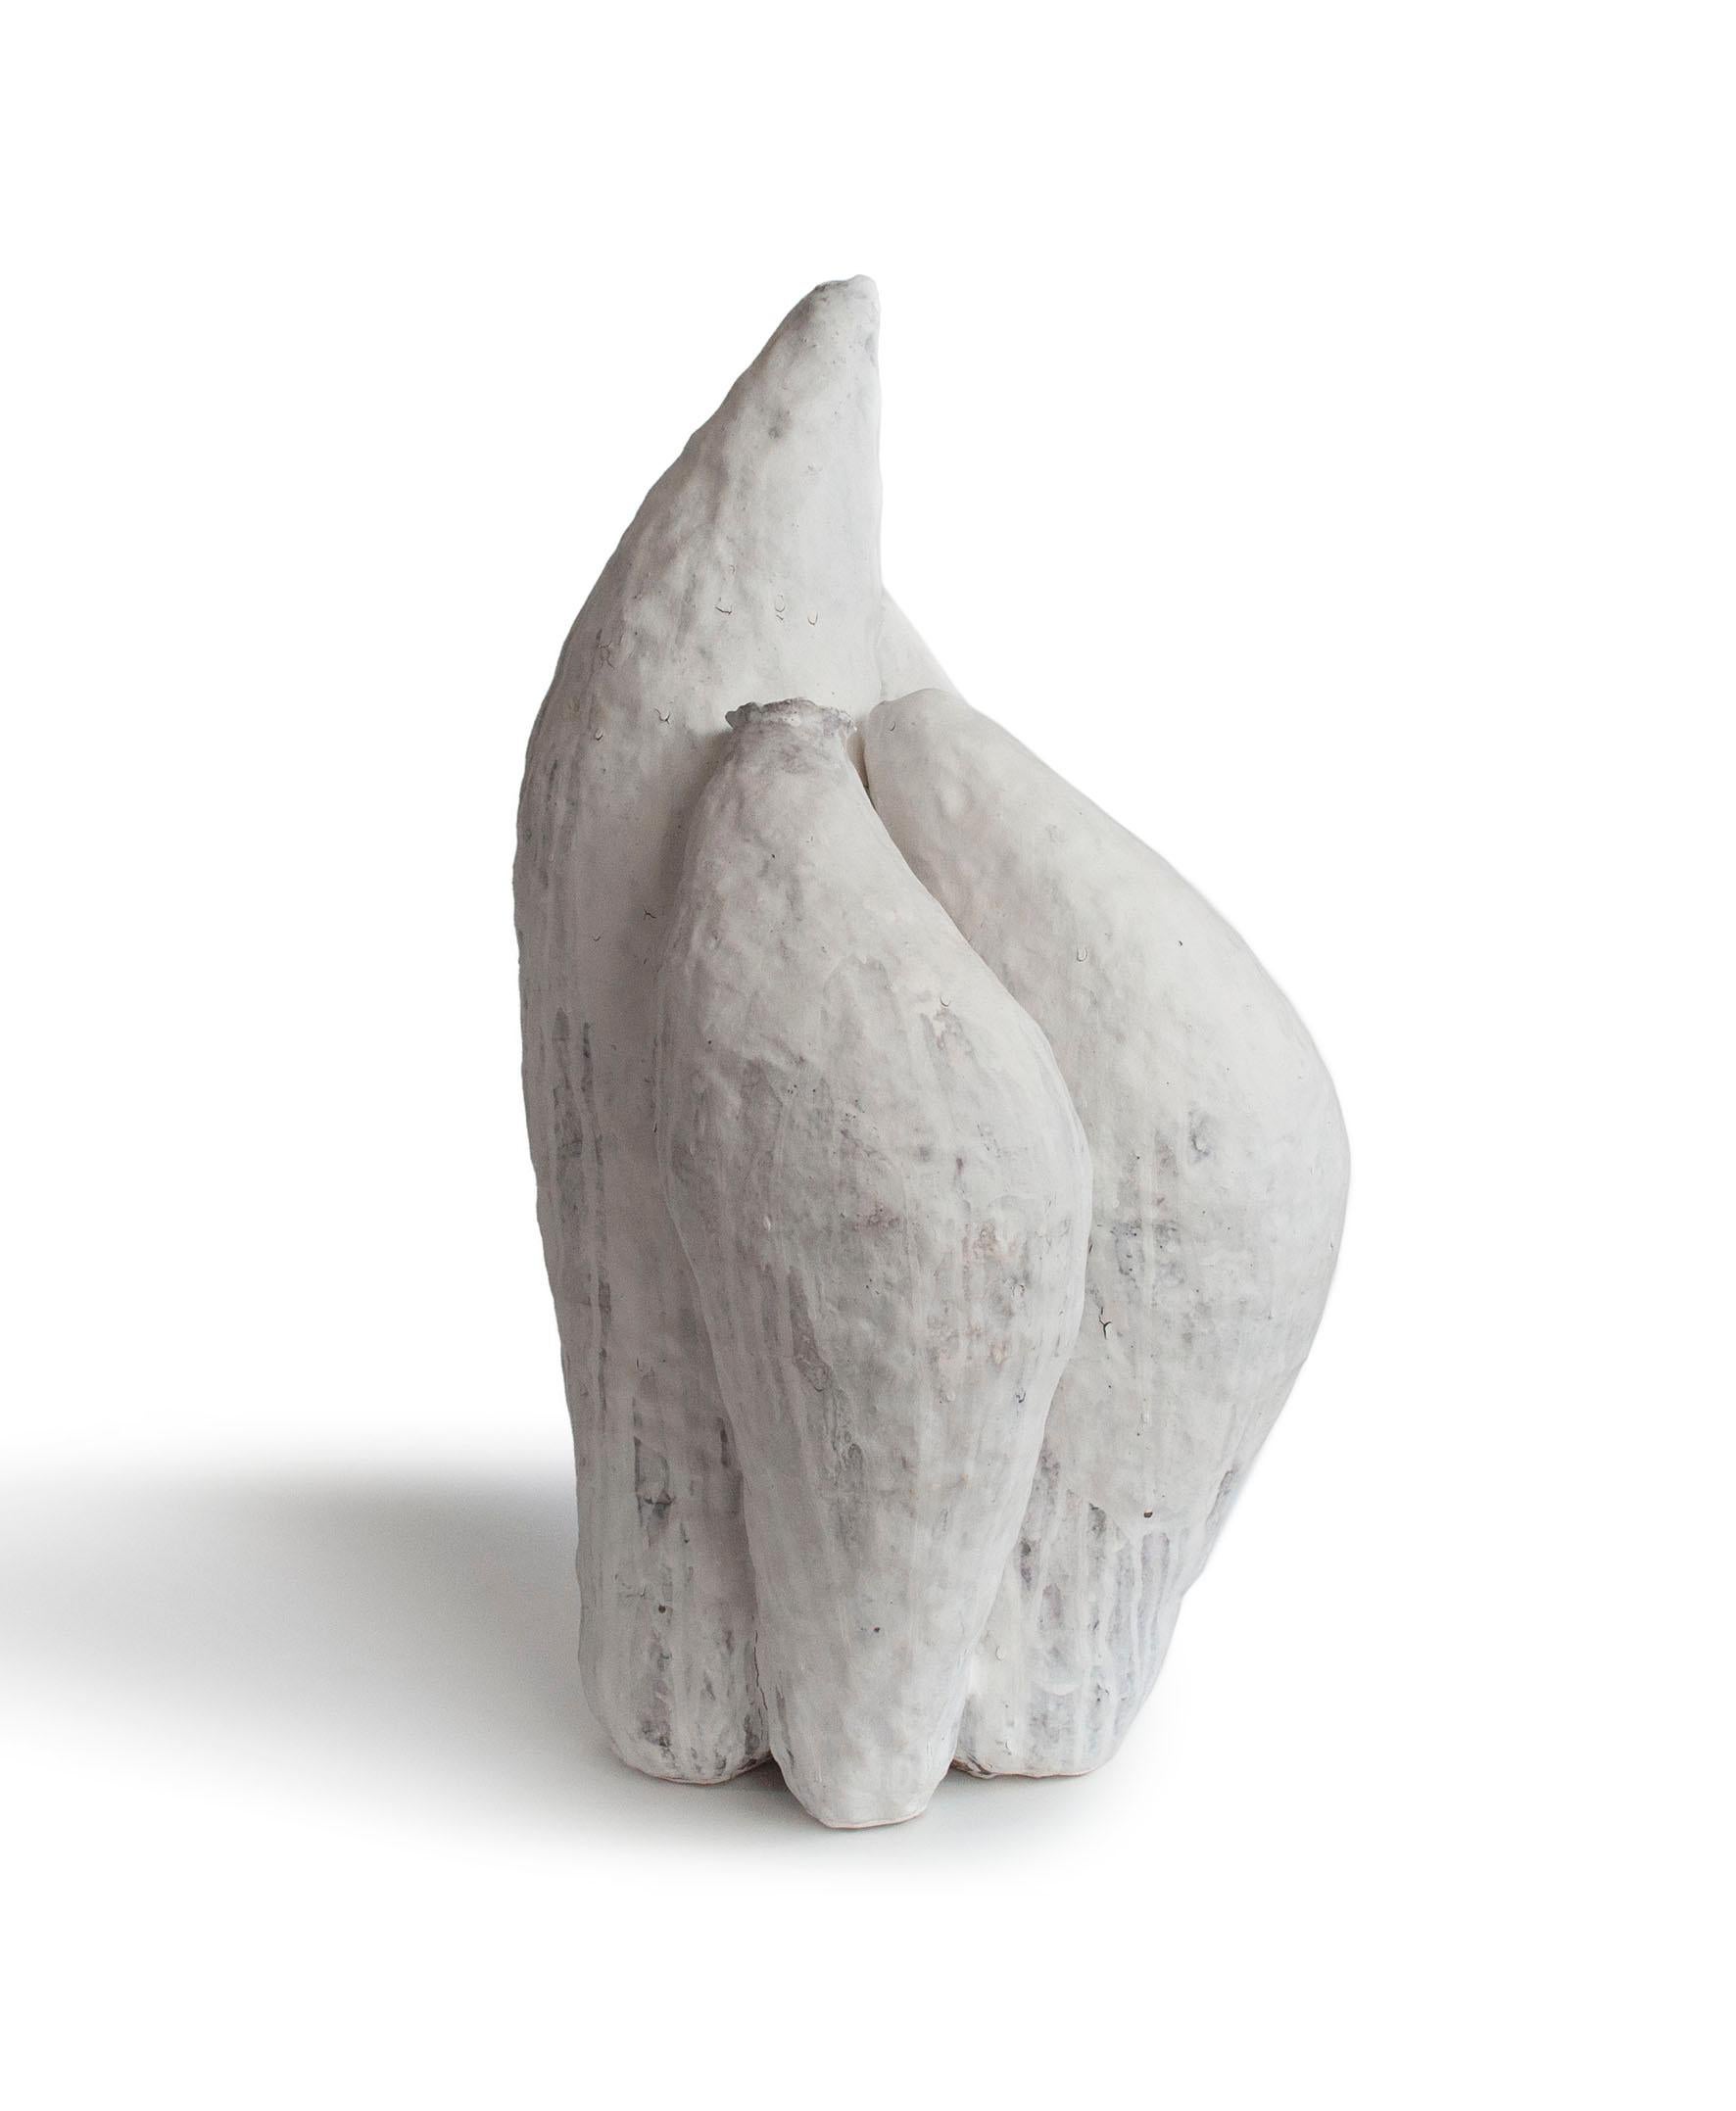 White ceramic Artwork signed by Jojo Corväiá
Berber series
Measures: H 80 x W 42 x D 50 cm
Materials: clay, porcelain, natural pigments. 

Jojo Corväiá: 
In essence, I’m not interested in perfection.
Being free of flaws and defects directly